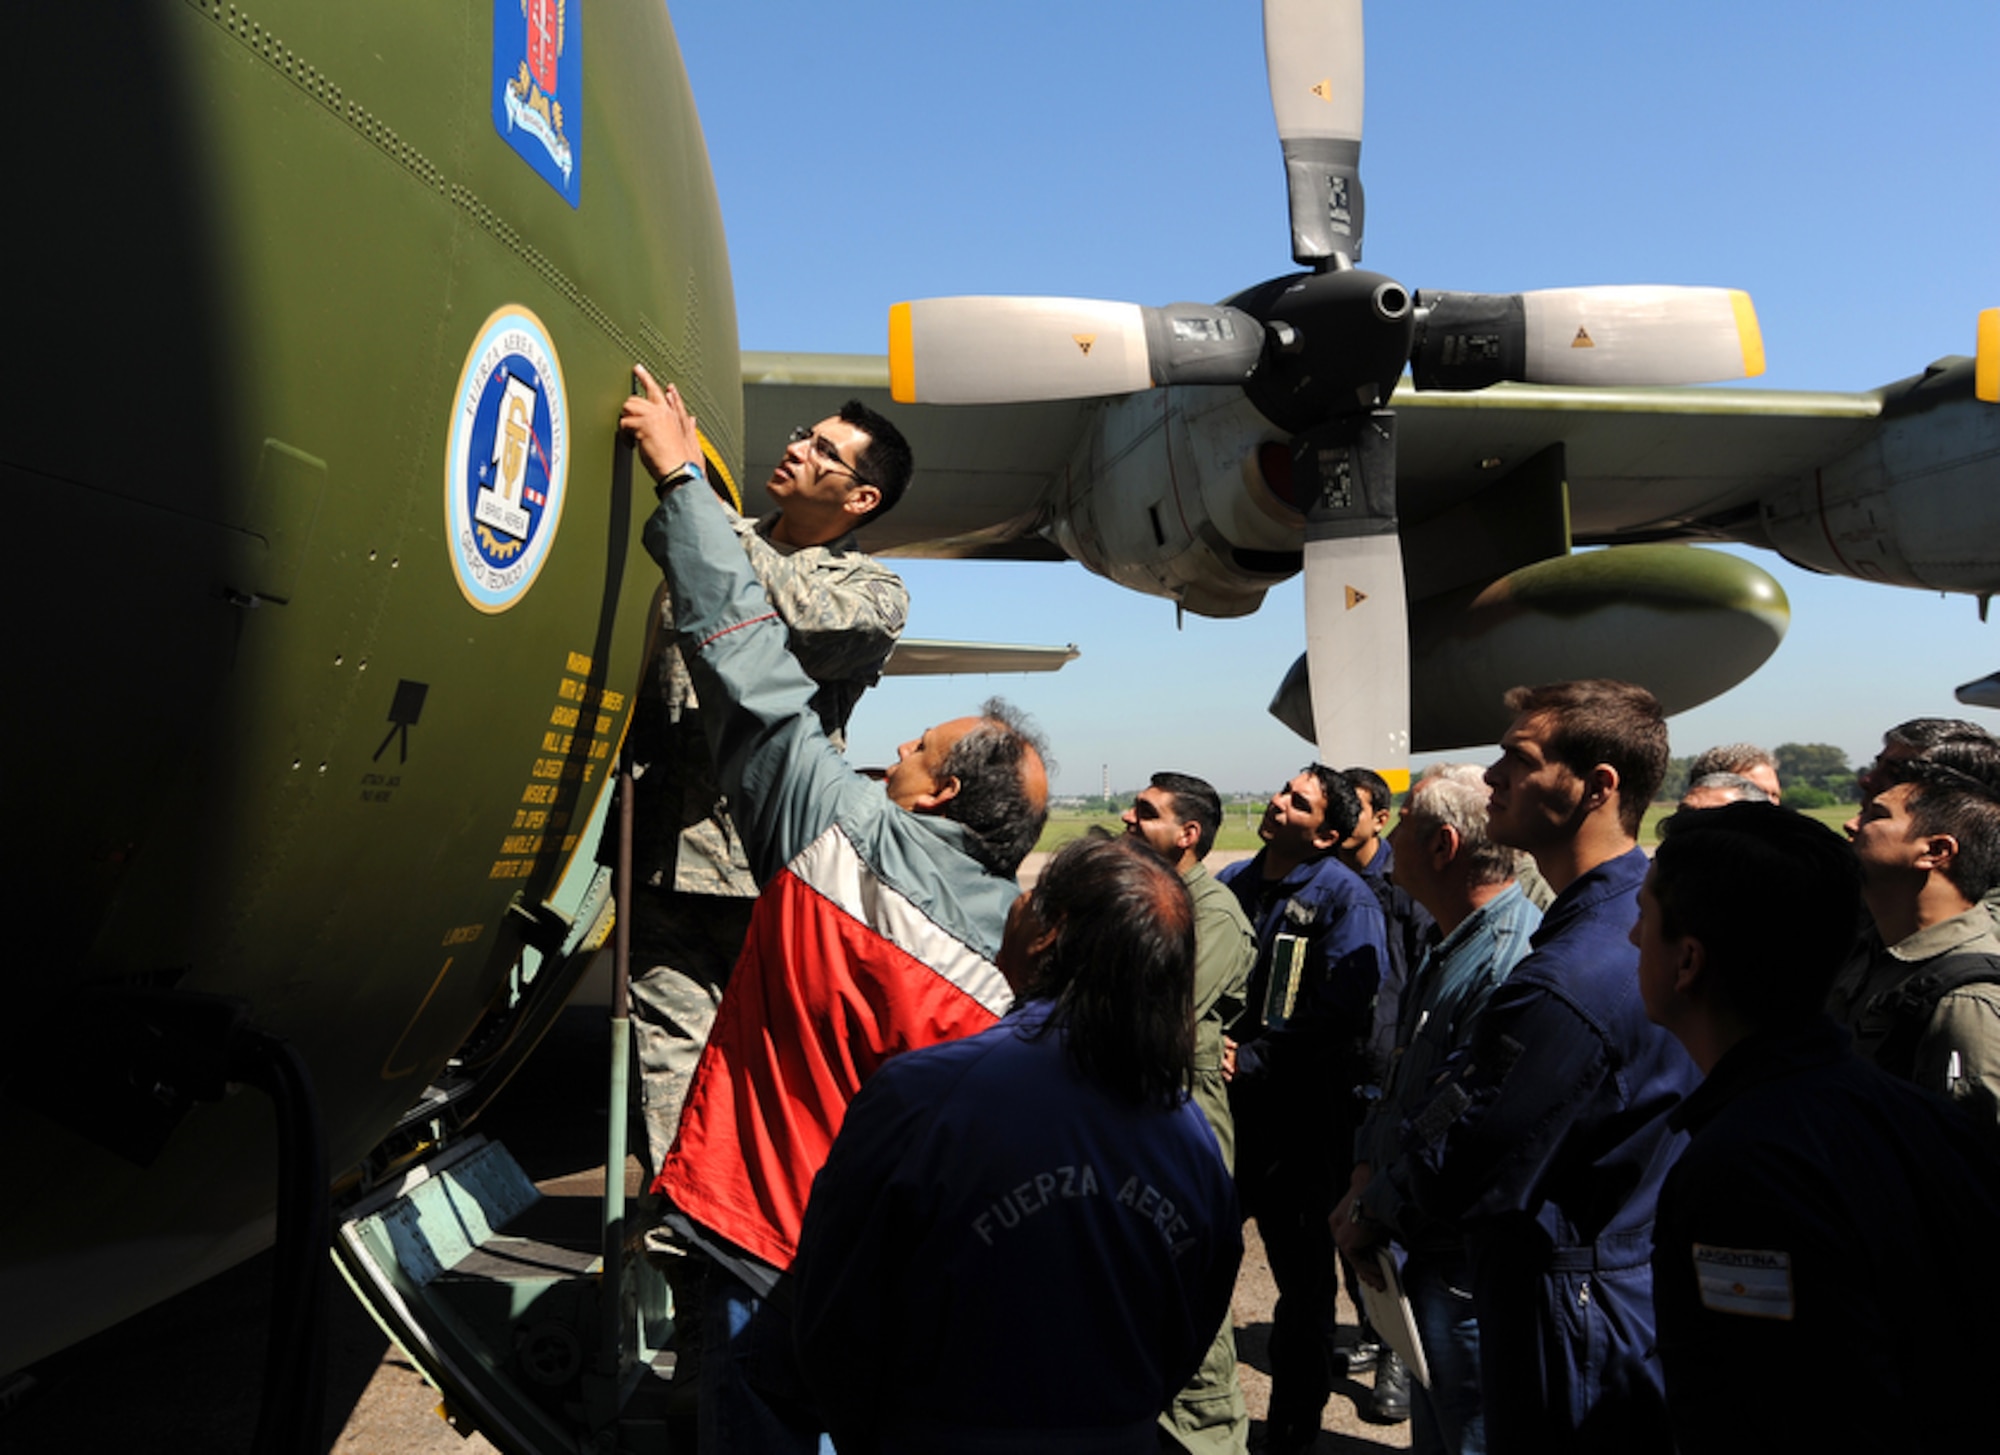 U.S. Air Force Staff Sgt. David Hinojosa points out properly conducted structural repairs over the door frame on a C-130 Hercules during an evaluation of C-130 aircraft repairs at Palomar Air Base, Buenos Aires, Argentina. Sergeant Hinojosa is participating in Operation Southern Partner -- an in-depth, two-week subject matter exchange emphasizing partnership, cooperation and sharing of information with partner nation Air Forces in Latin America. (Air Force photo/Staff Sgt. Bennie J. Davis III) 